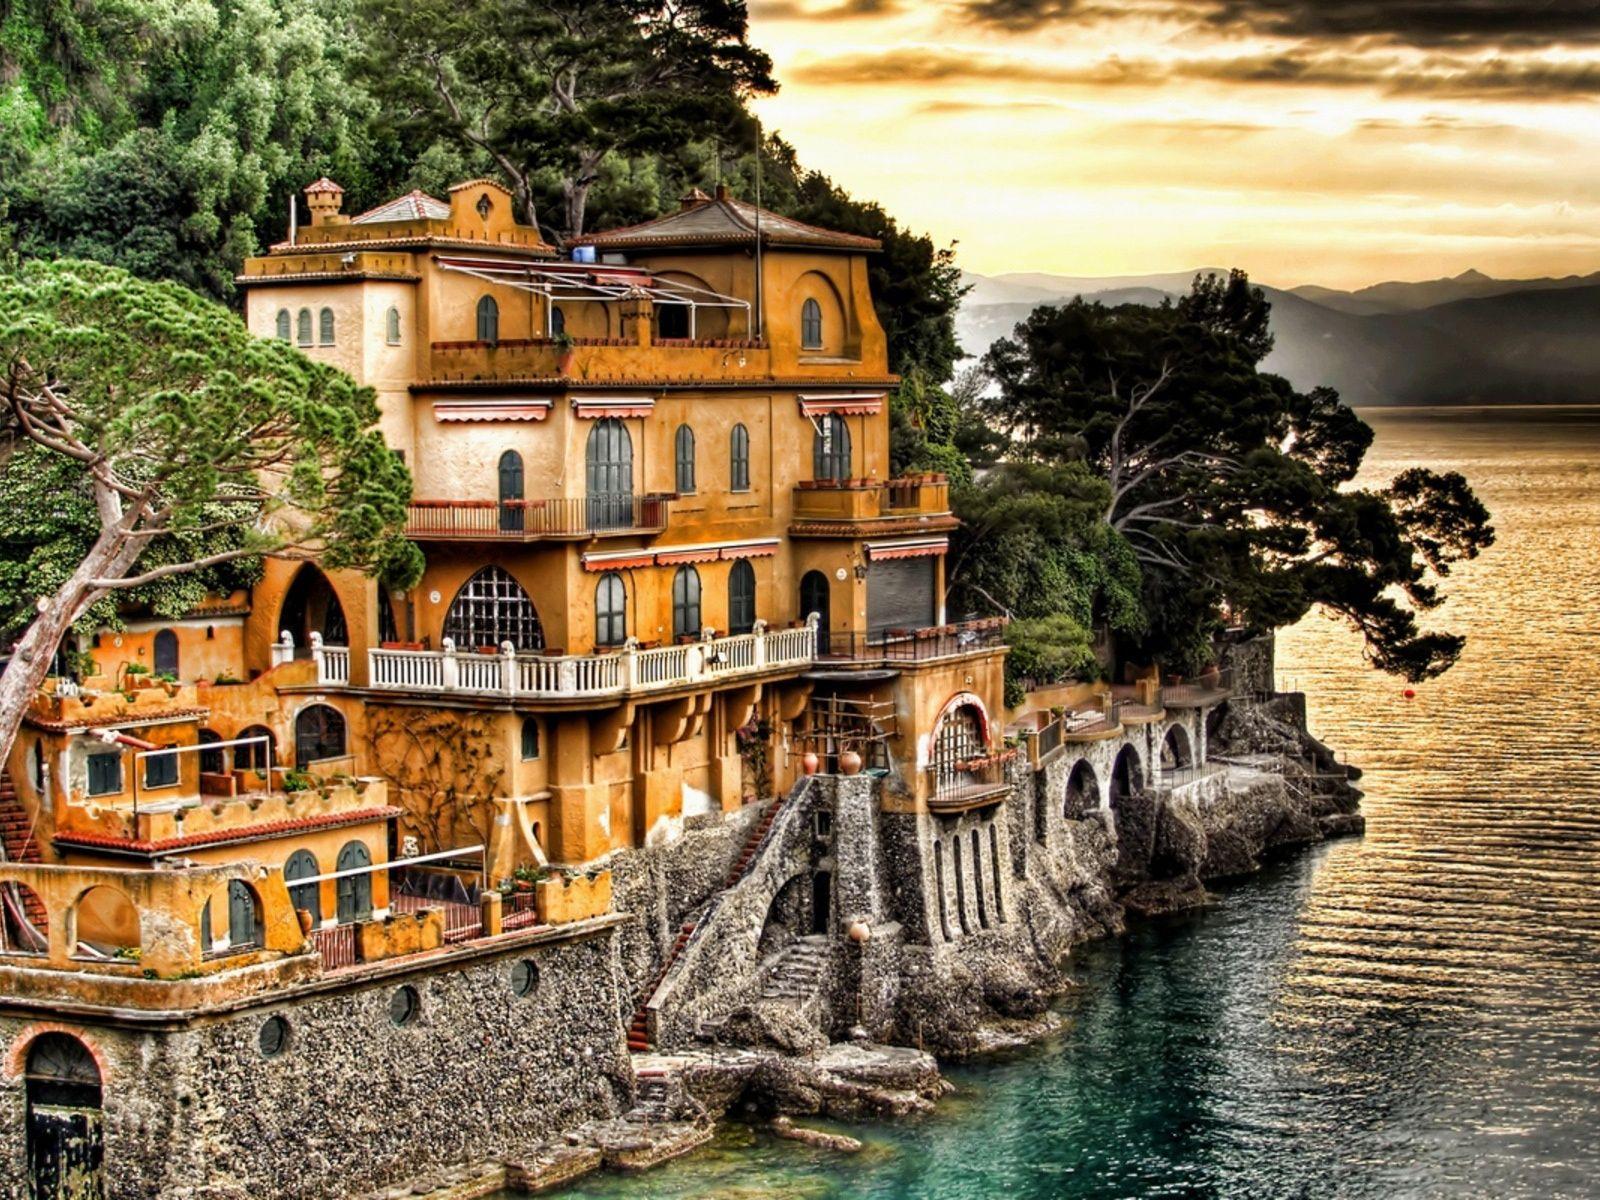 Old house in Genoa, Italy wallpaper and image